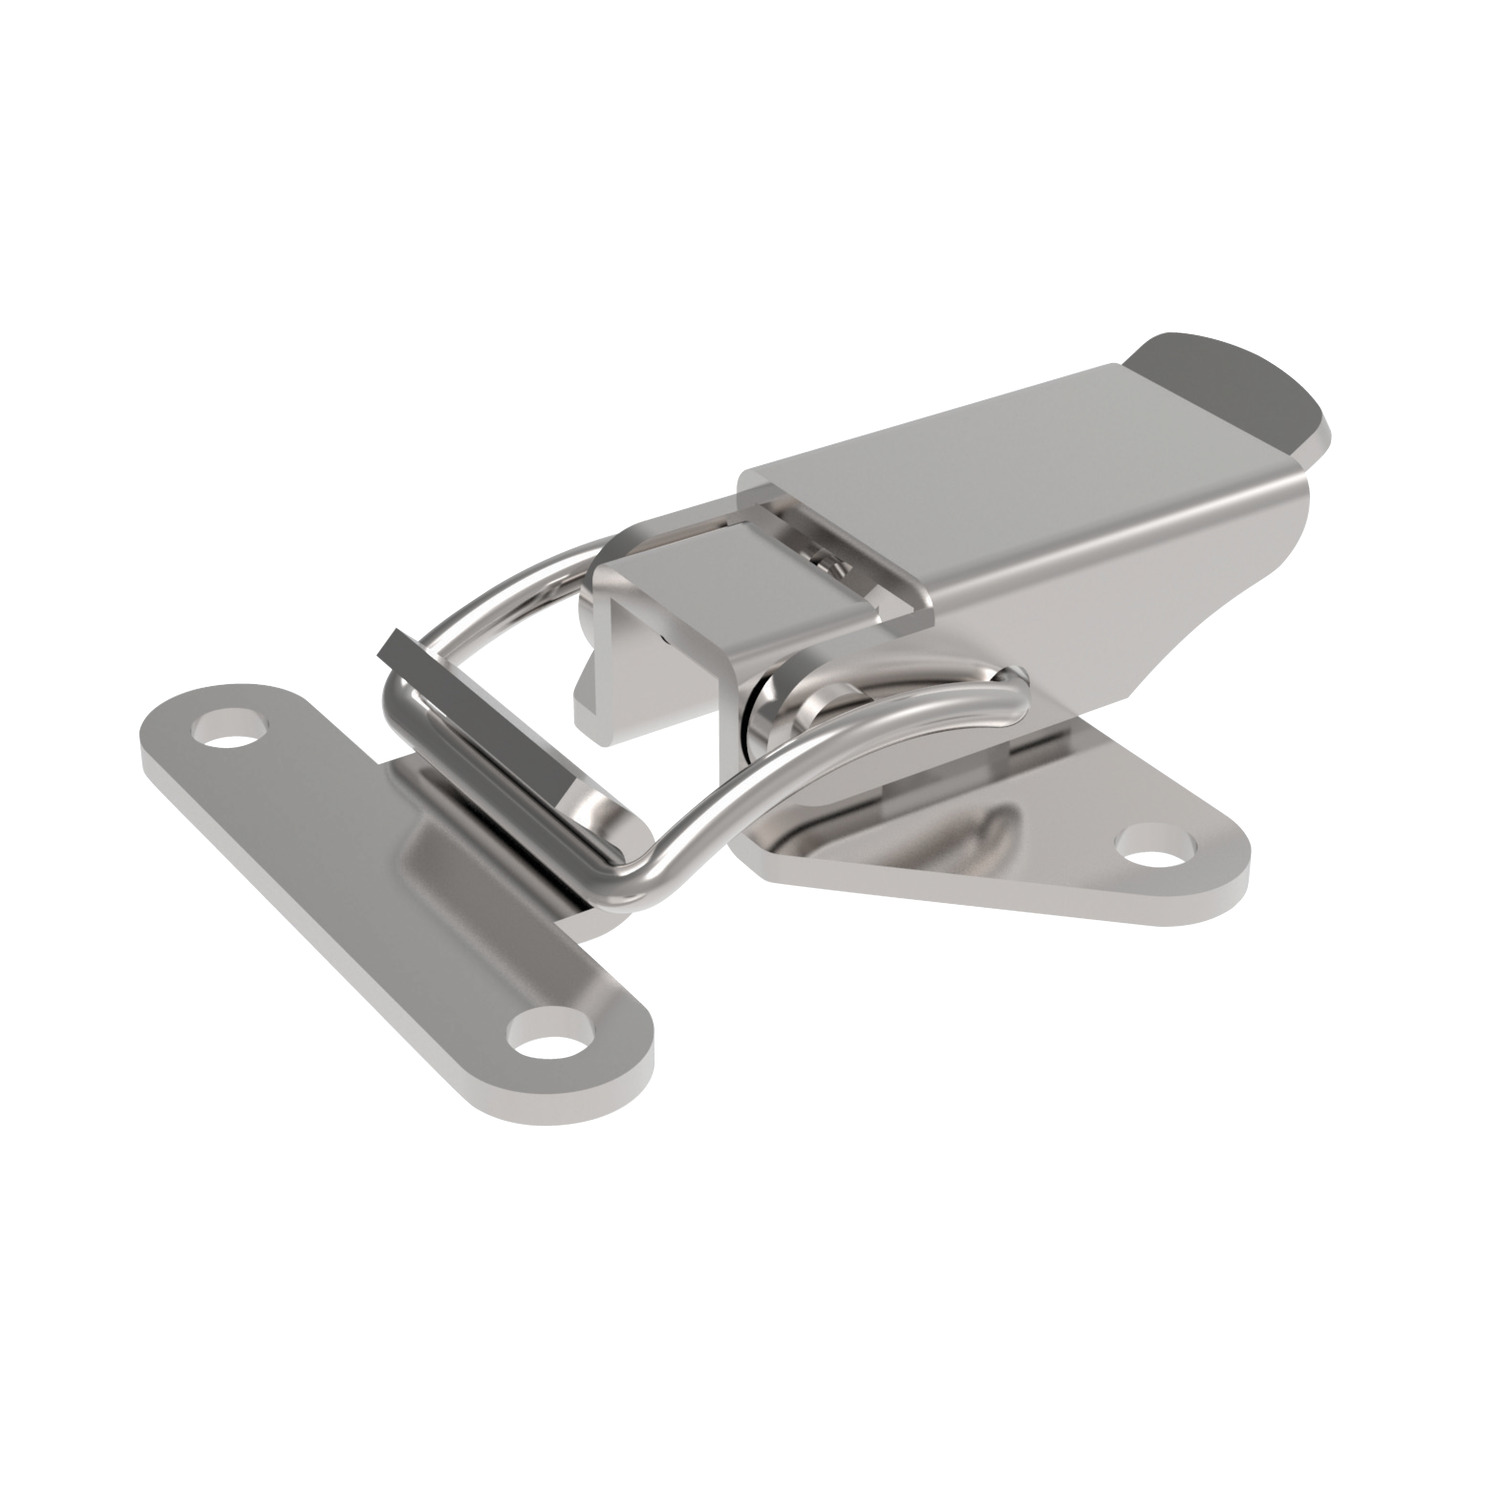 J0480.AC0004 Toggle Latches Zinc Plated Steel - 52 - 11 - 33